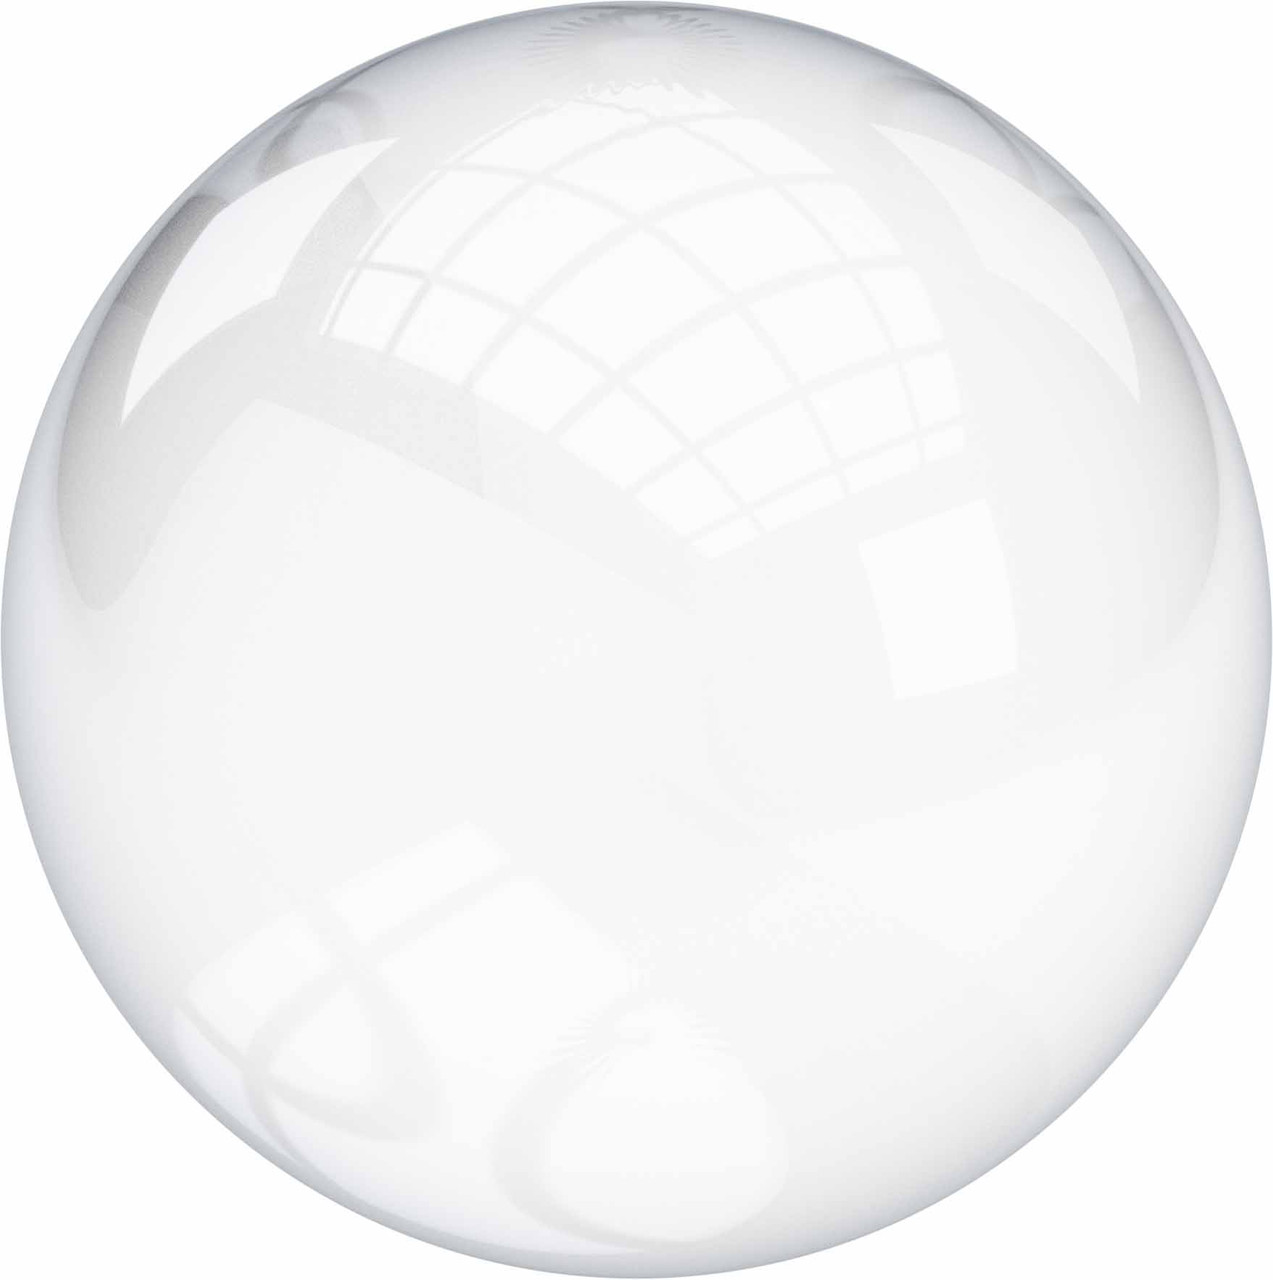 3 Solid Round Clear Acrylic Balls